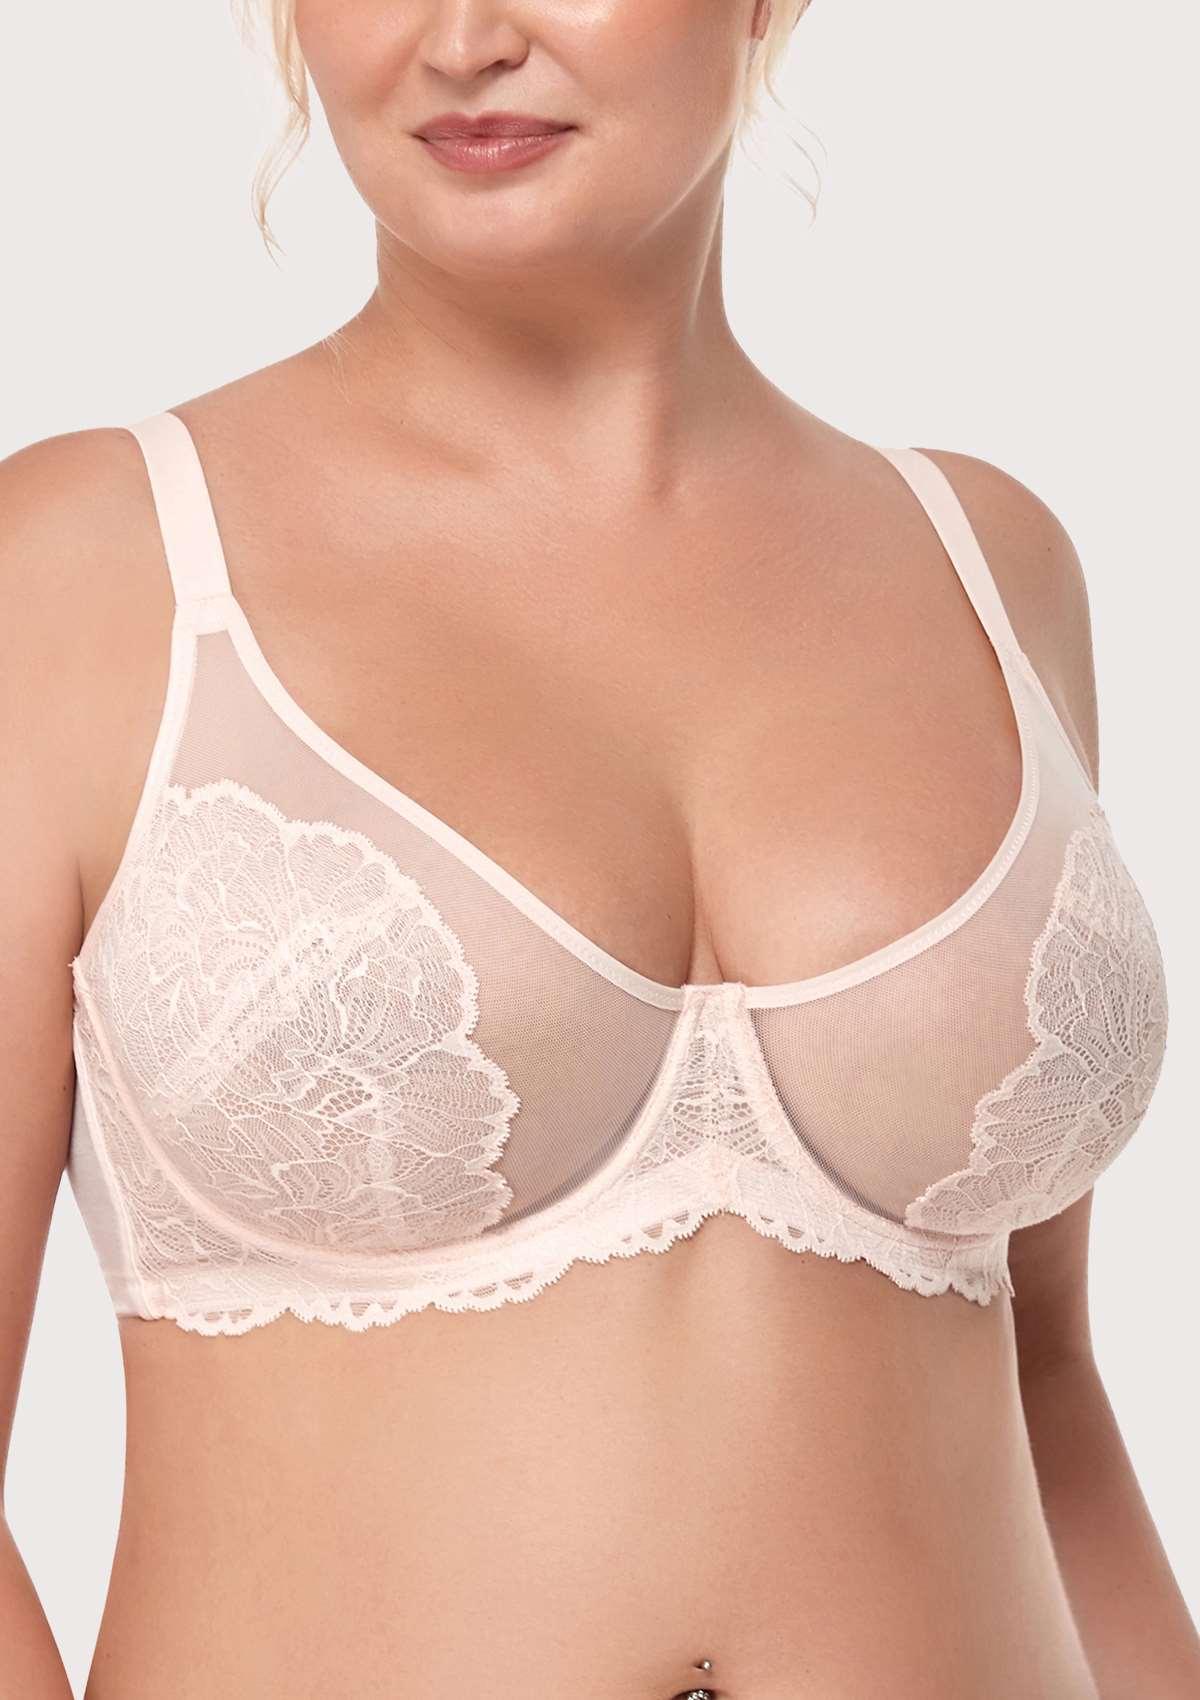 HSIA Blossom Matching Lacey Underwear And Bra Set: Sexy Lace Bra - Dusty Peach / 36 / H